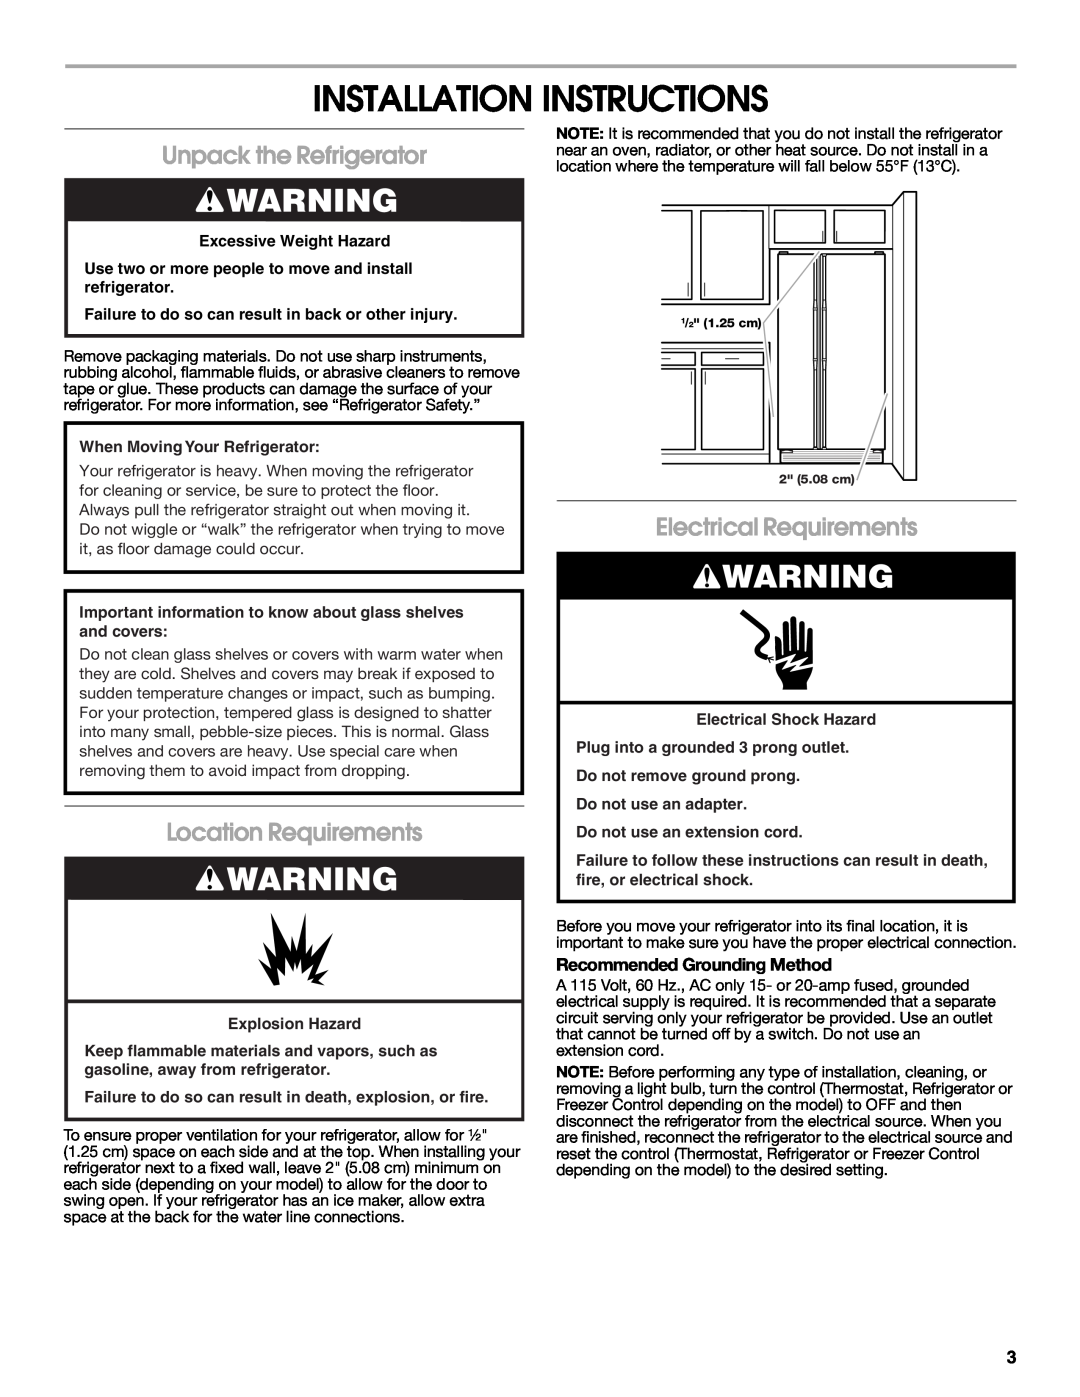 Crosley CS22AFXKQ06 Installation Instructions, Unpack the Refrigerator, Location Requirements, Electrical Requirements 